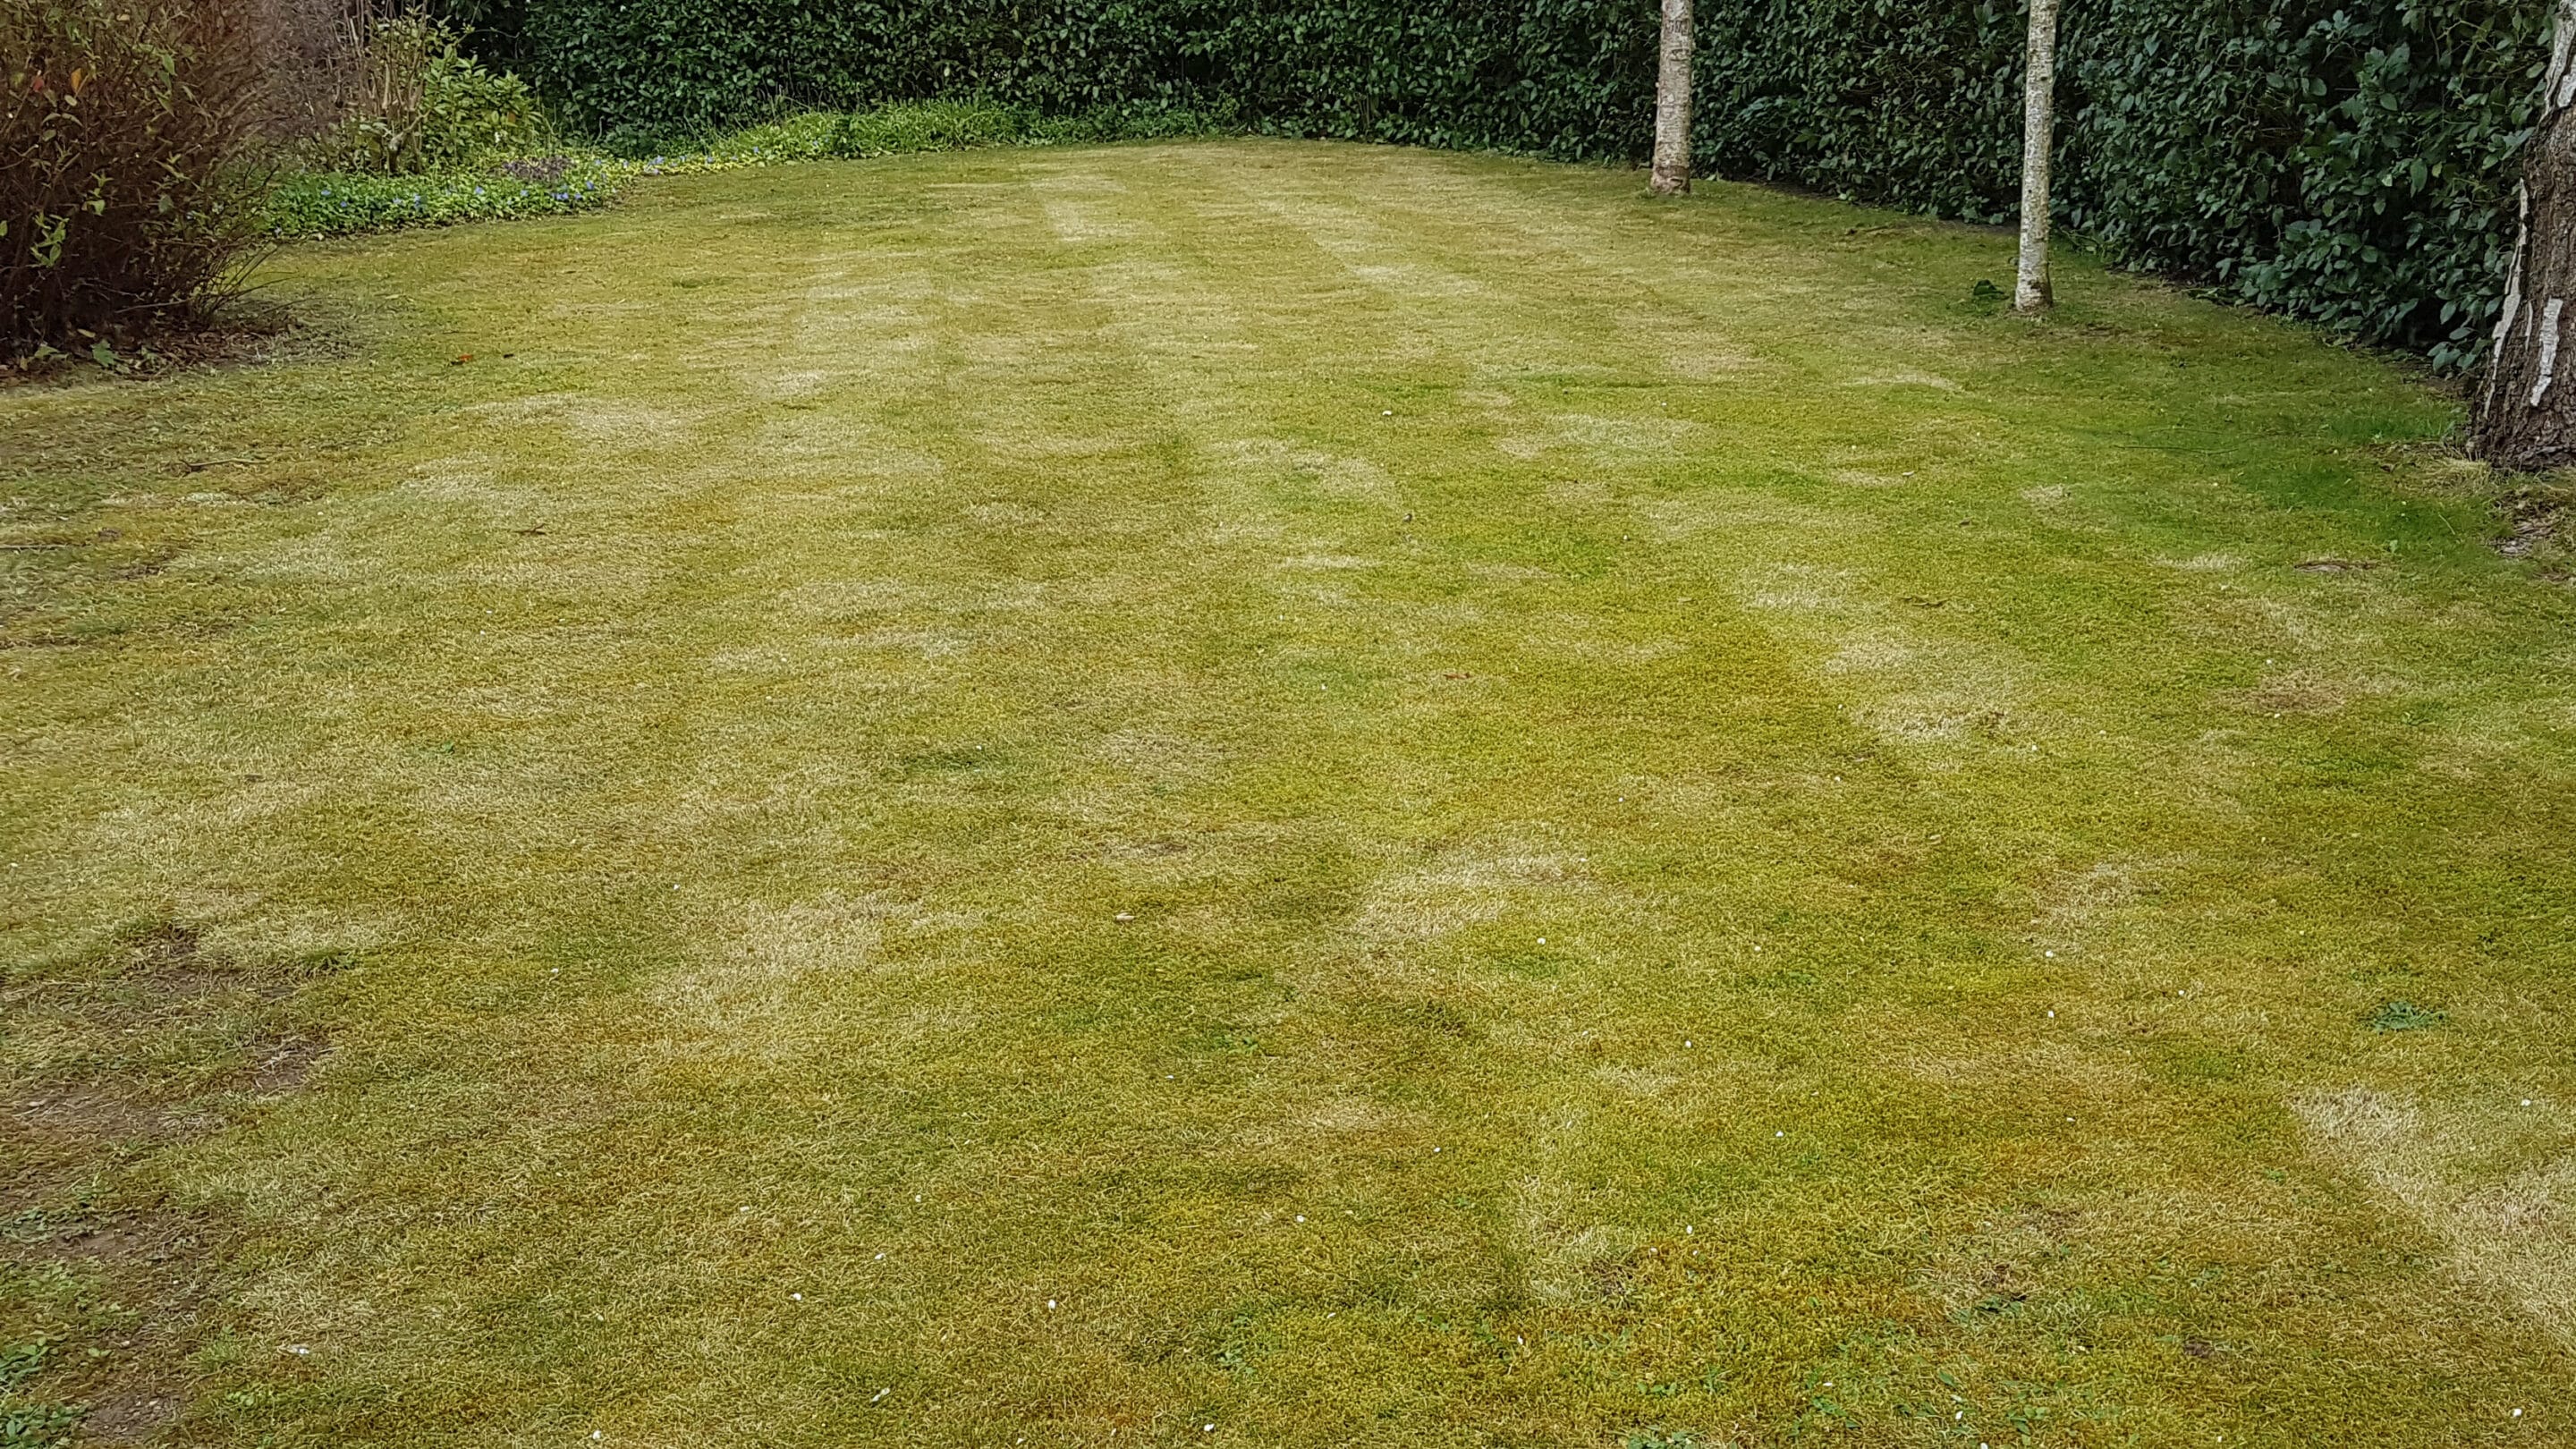 Patchy lawn